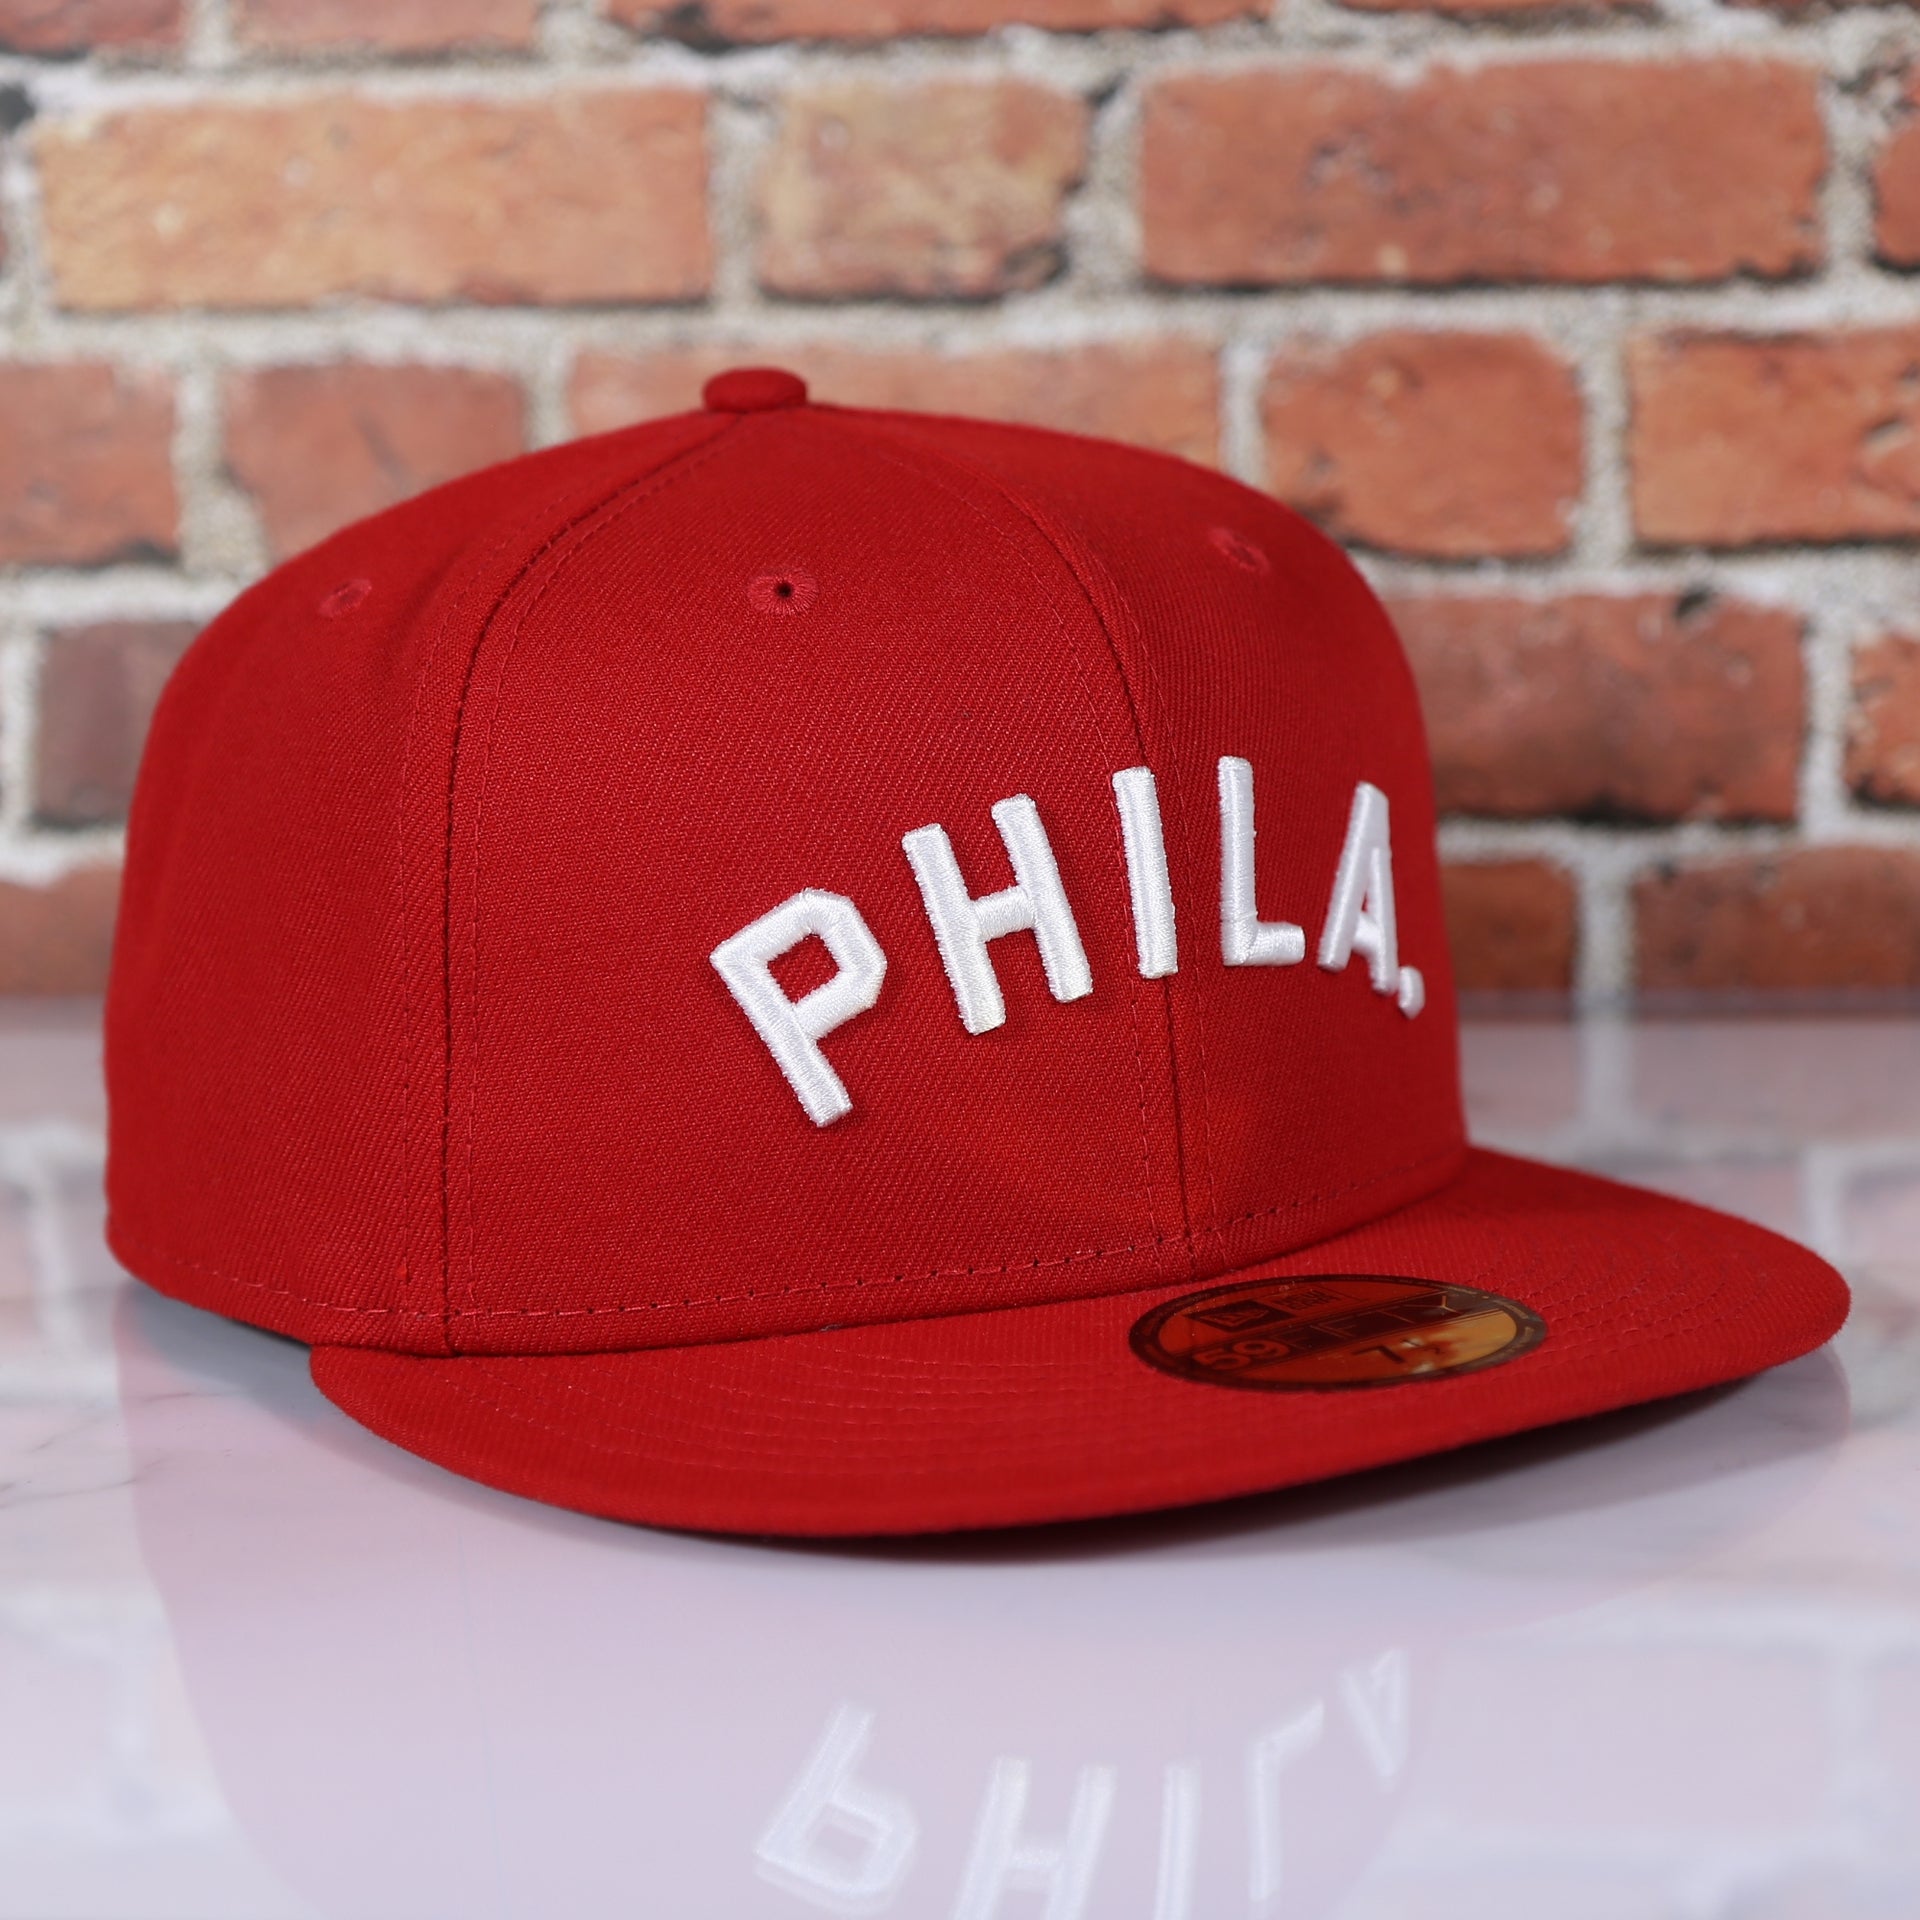 Philadelphia Phillies Arched "PHILA" Lettering 59Fifty Fitted Cap | Old School Phillies Red Bottom New Era Fitted Hat